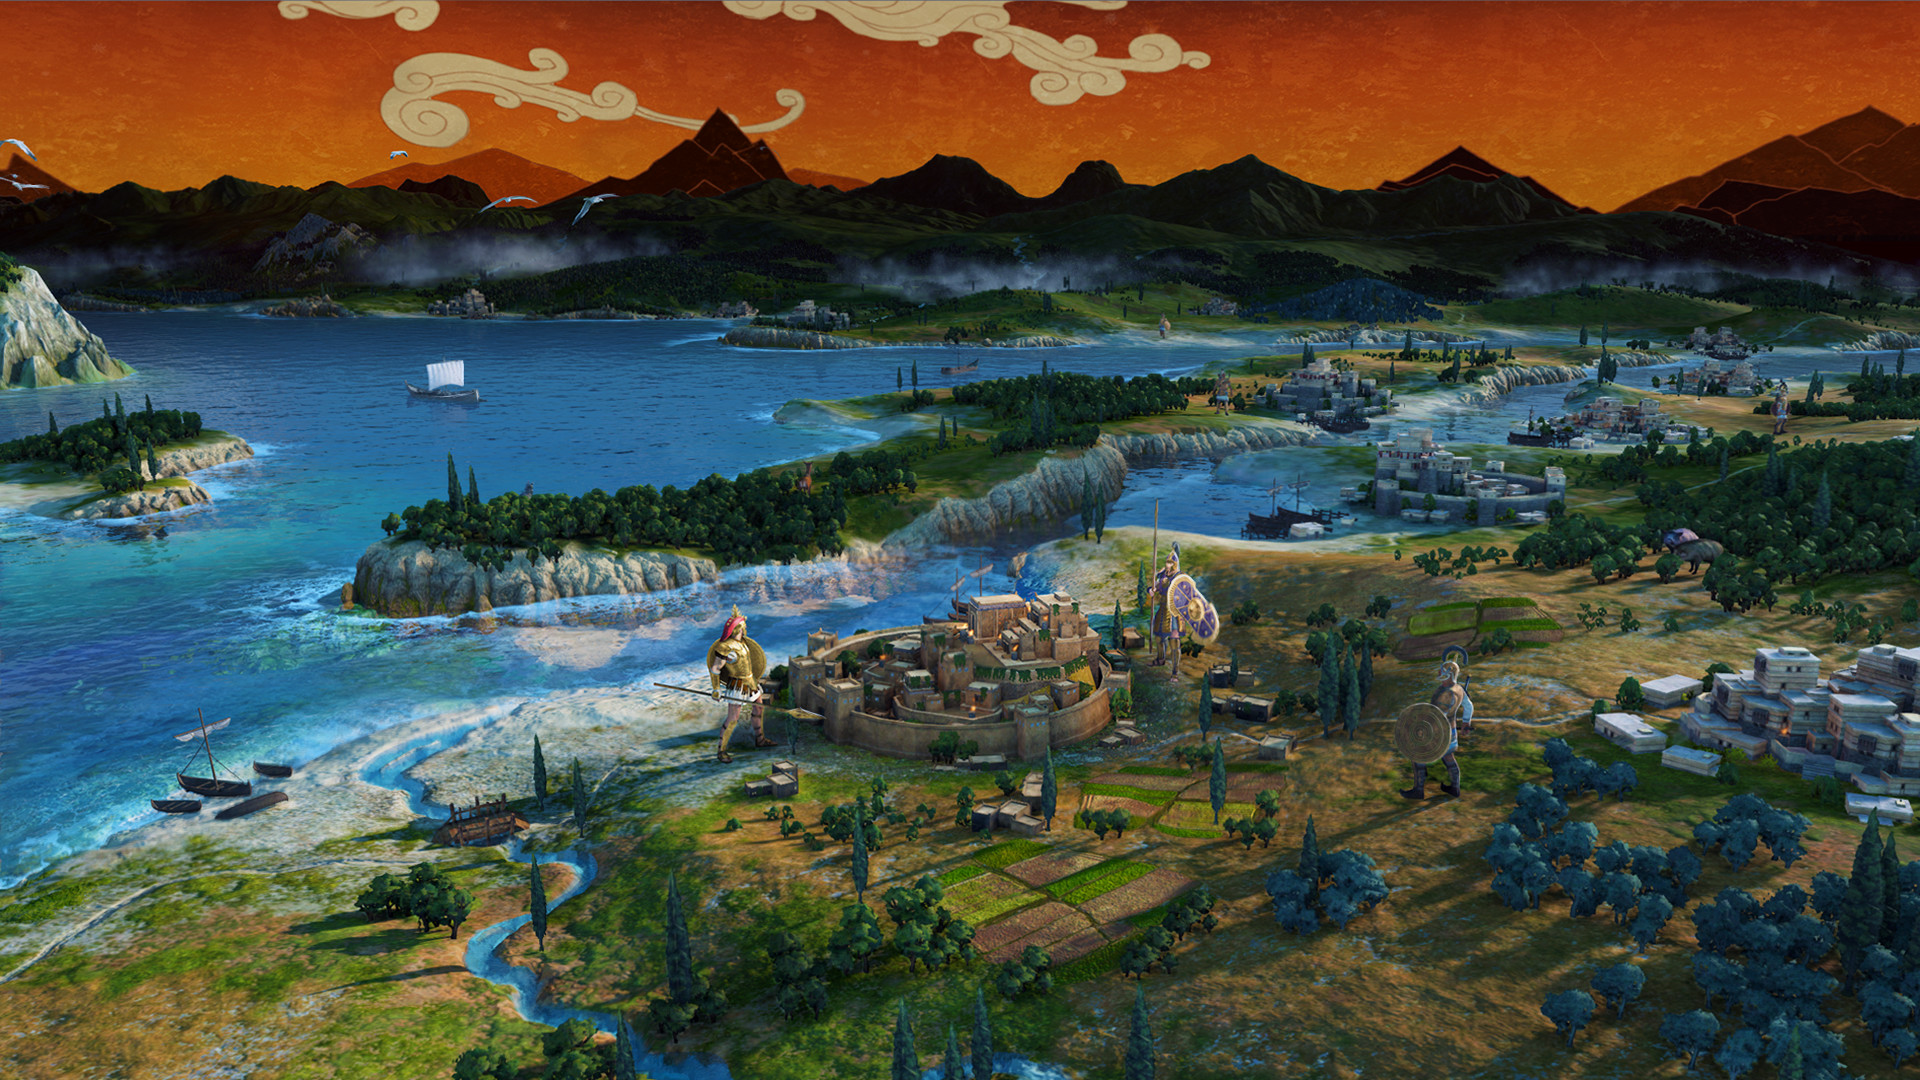 HD wallpaper featuring a scenic landscape from A Total War Saga: TROY game with vibrant seascape and ancient city.